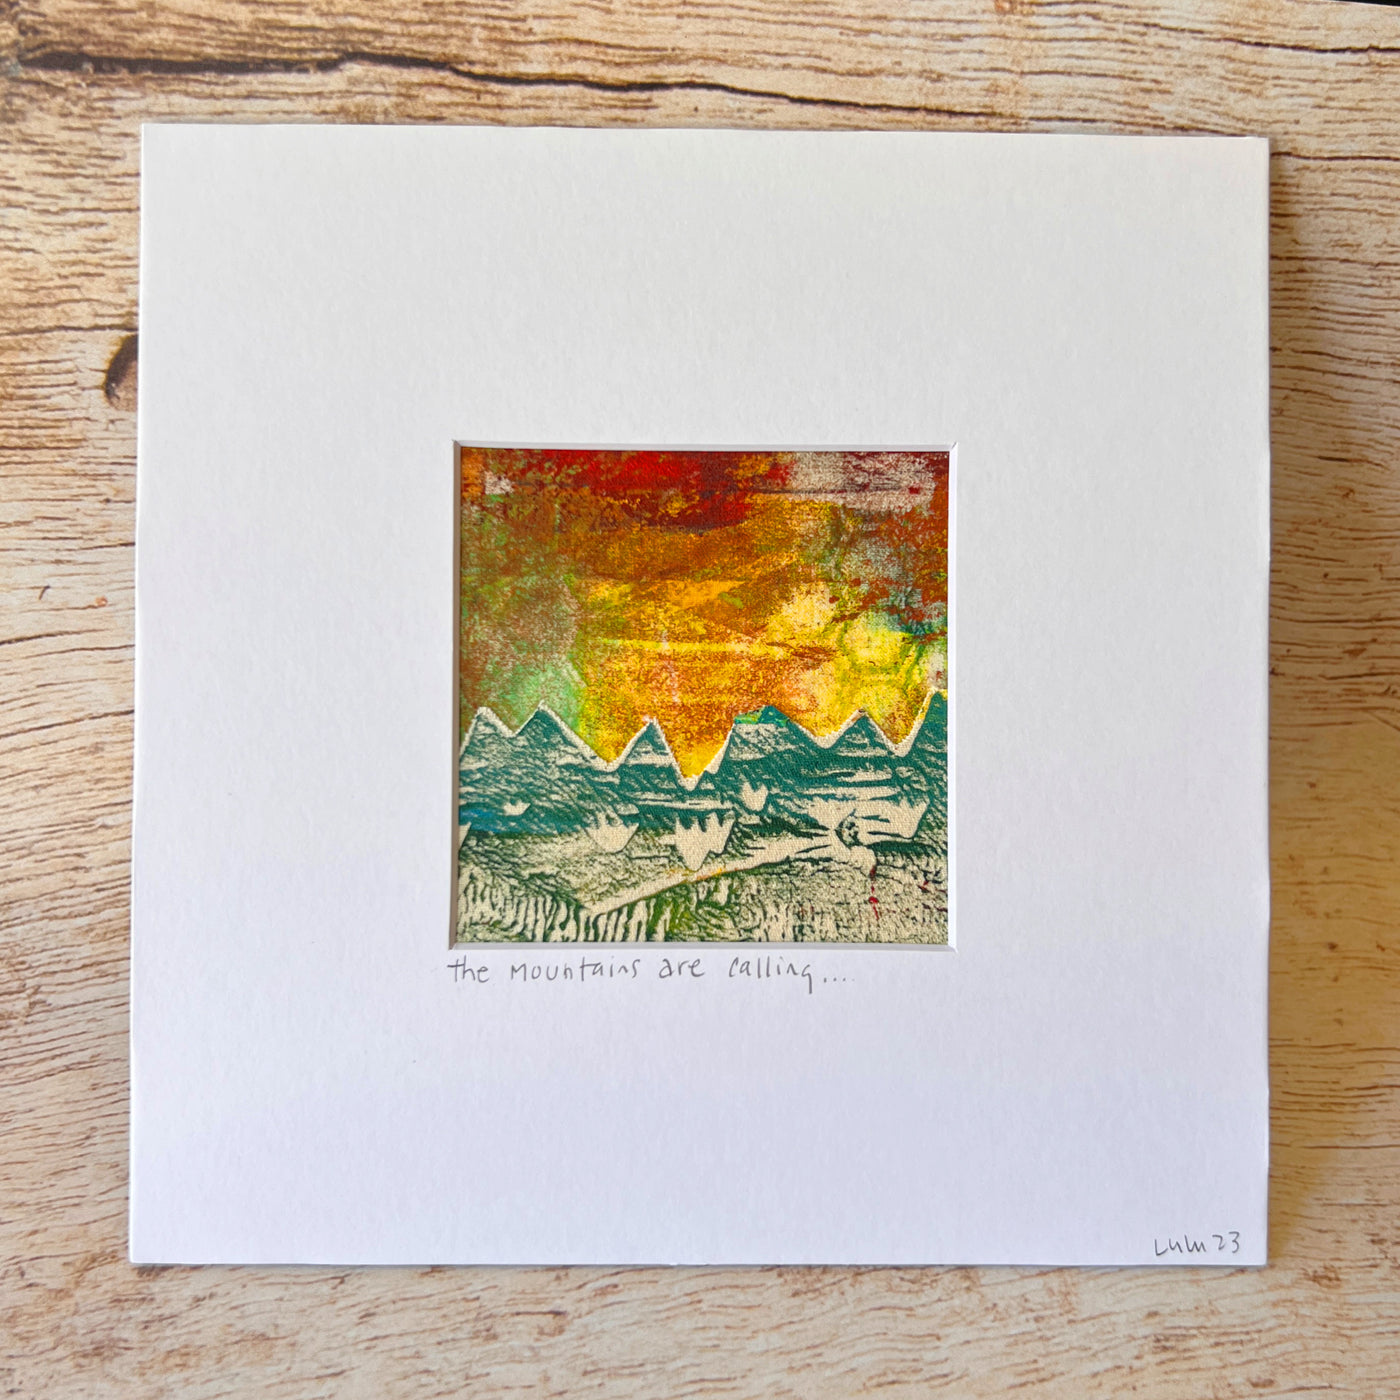 the mountains are calling in this original pretty clever fabric art print with yellows, greens and reds